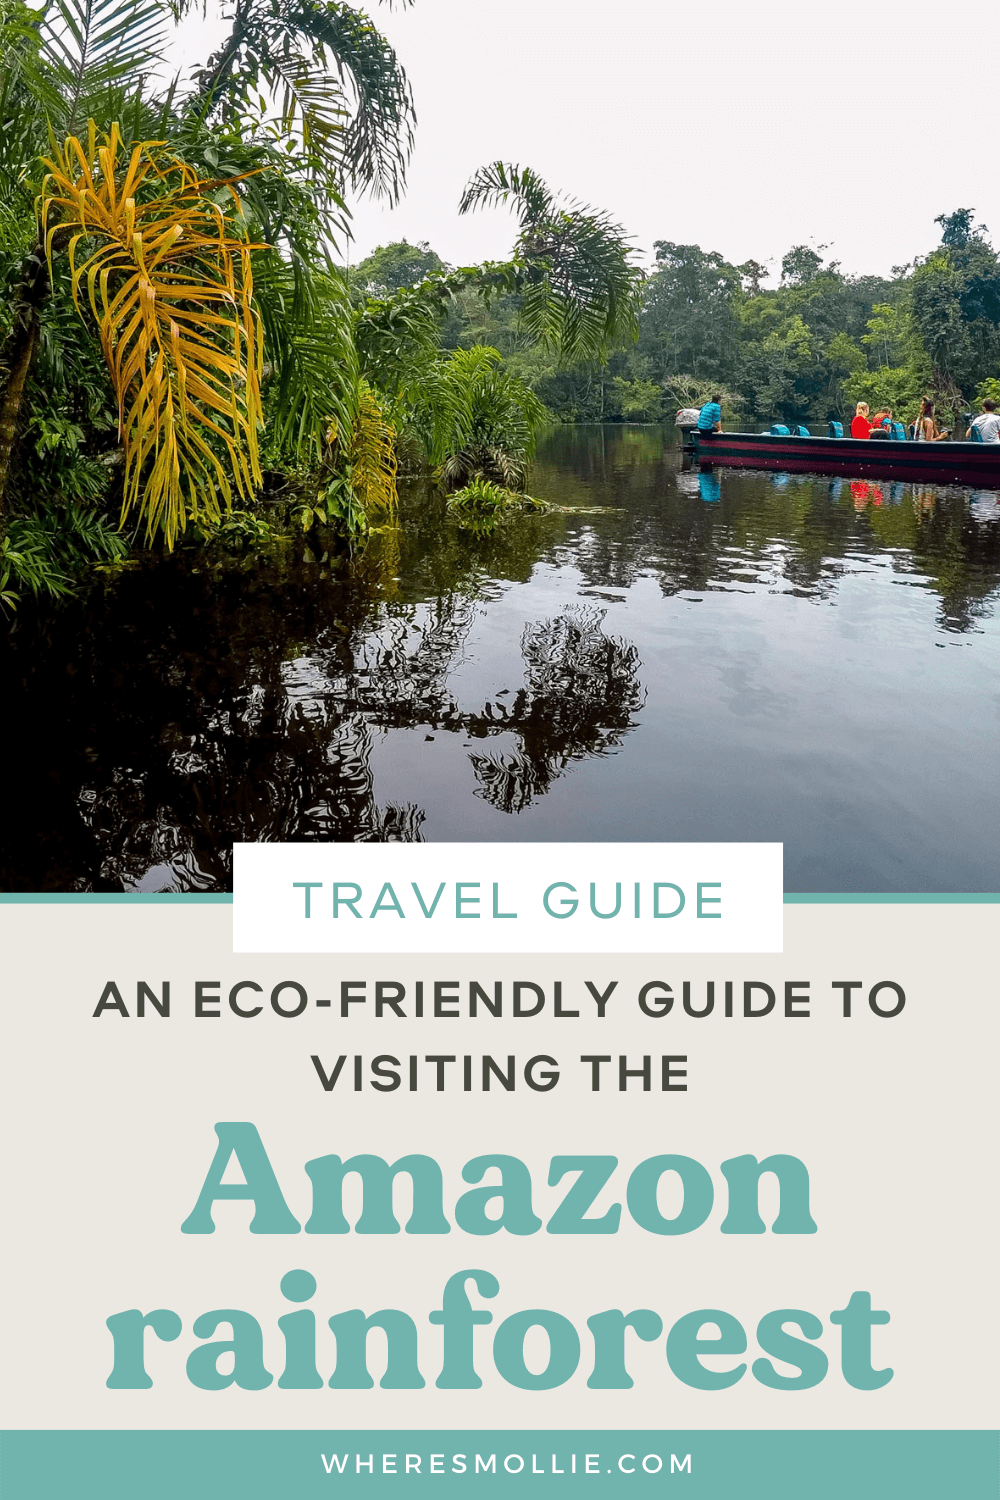 An eco-friendly guide to visiting the Amazon rainforest